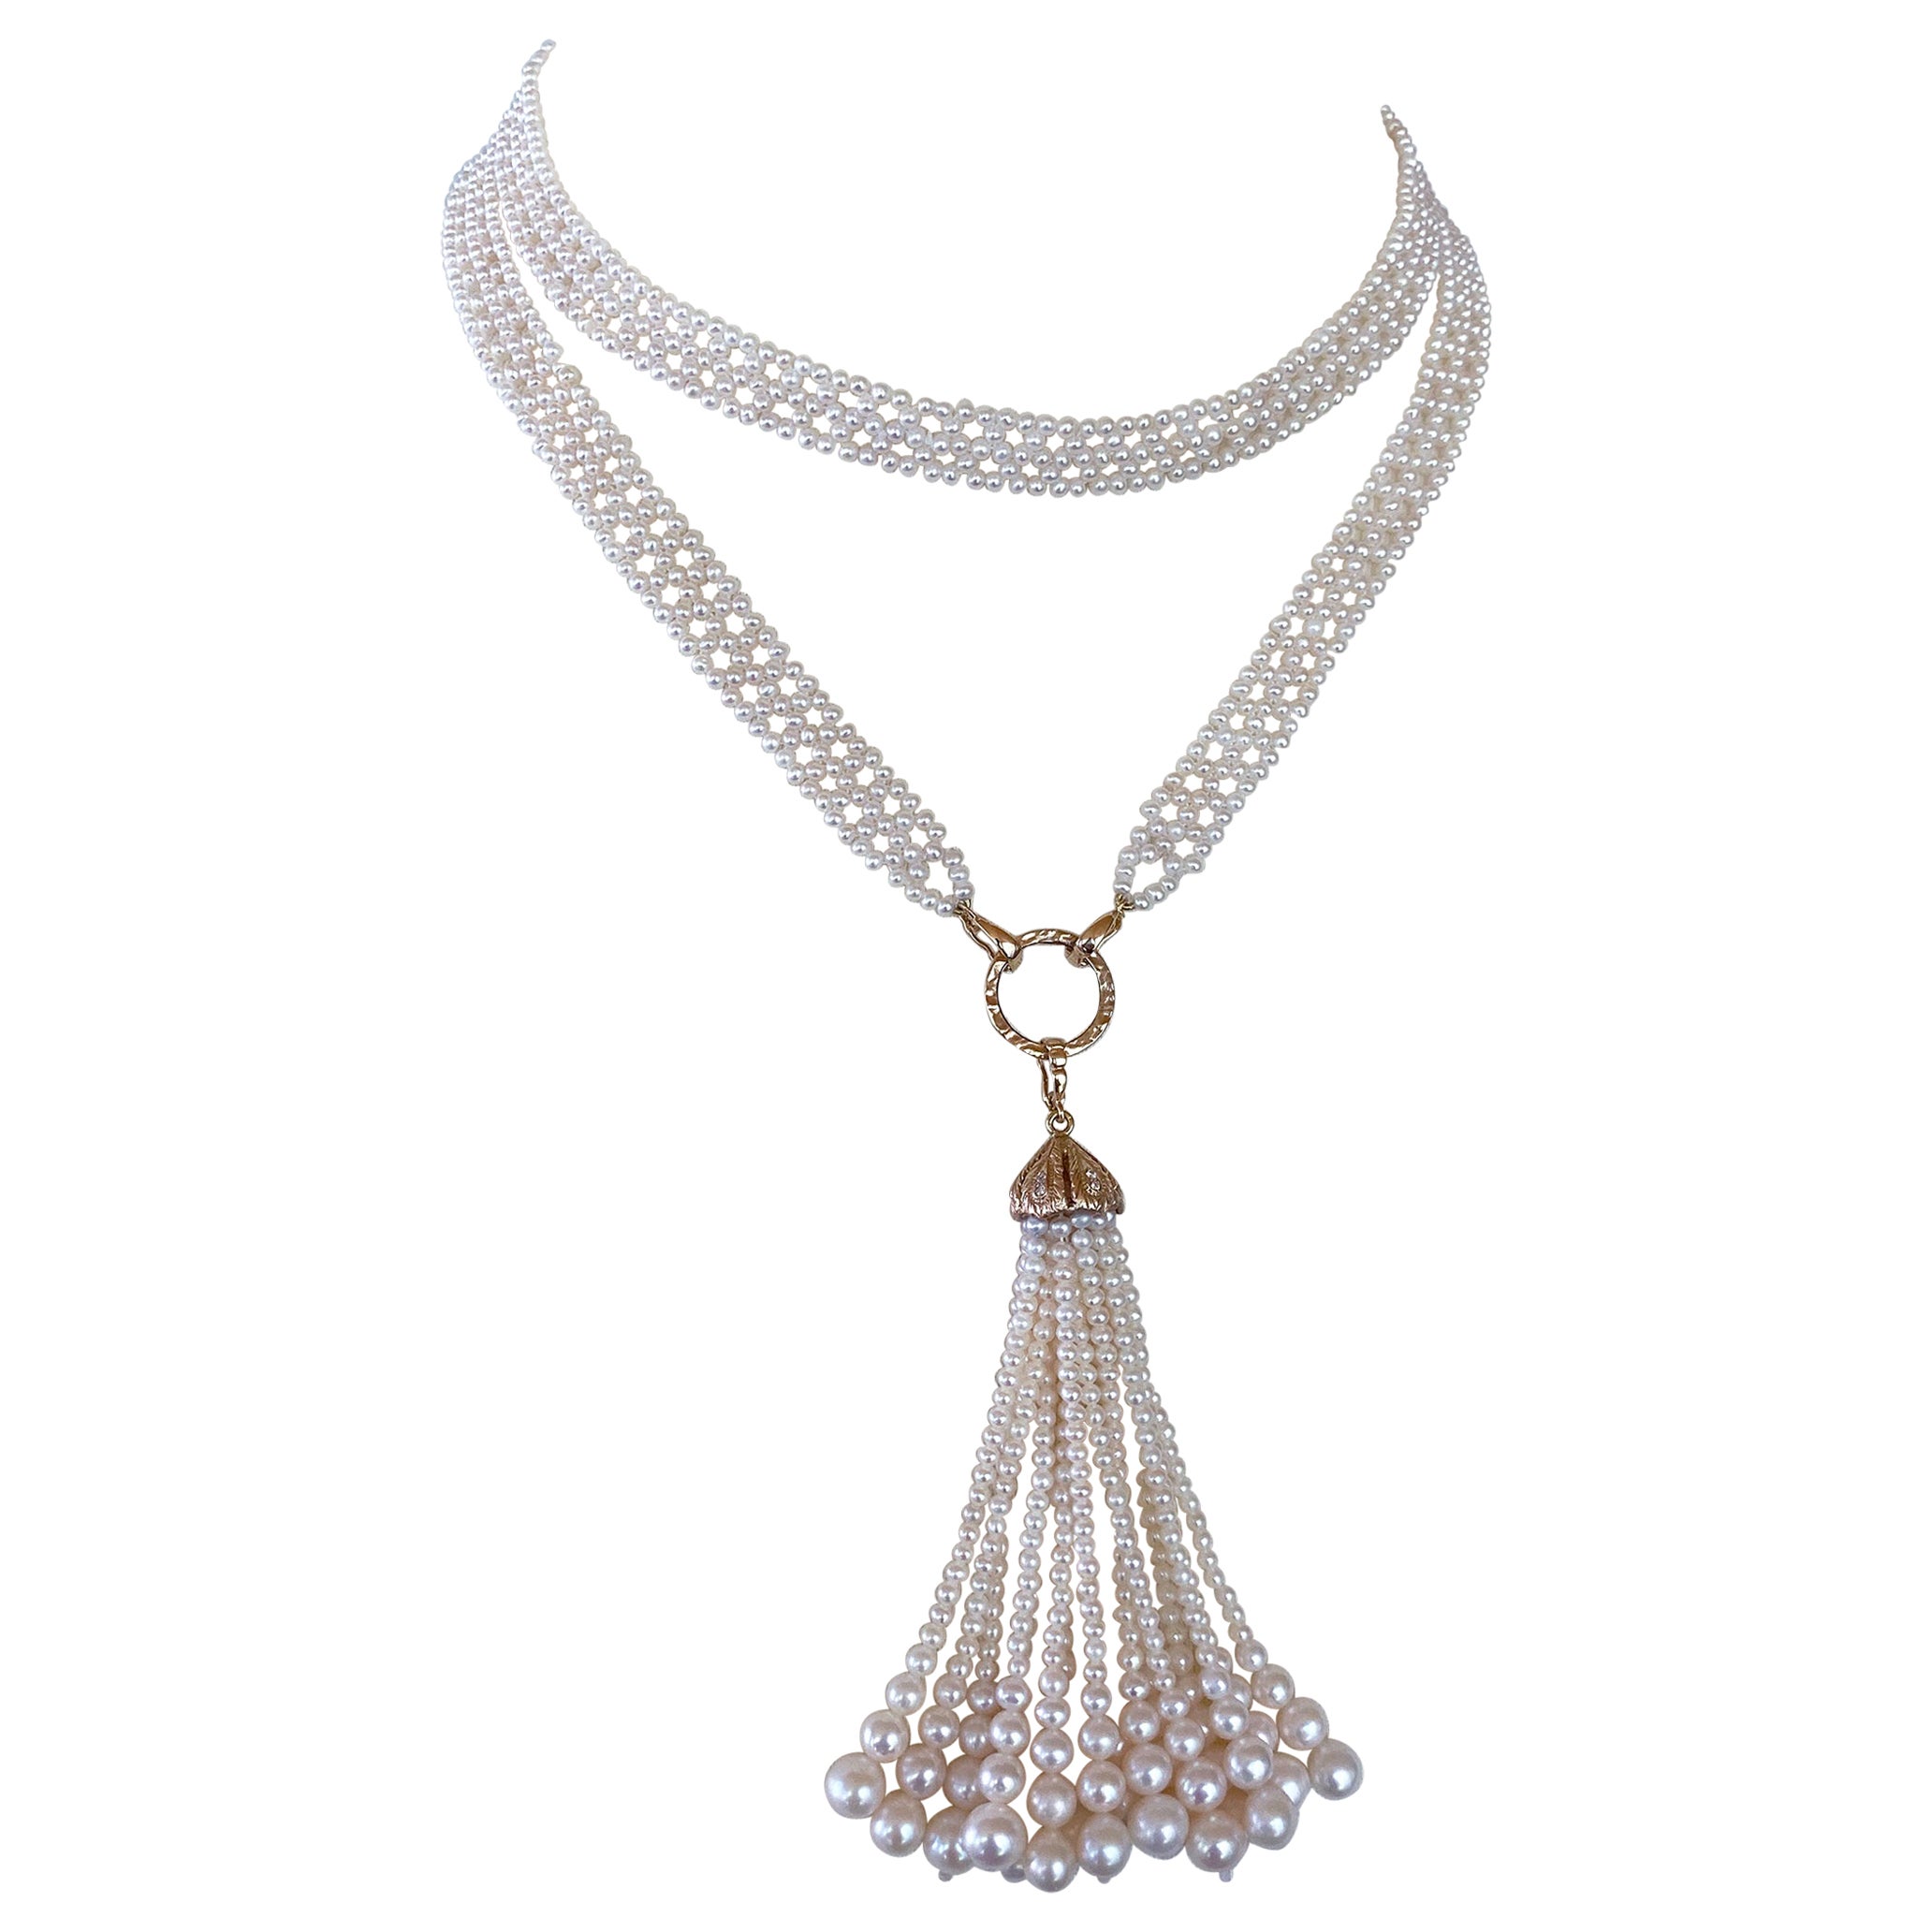 Marina J. Pearl Woven Lace Sautoir with Diamond Encrusted 14k Yellow Gold Tassel For Sale